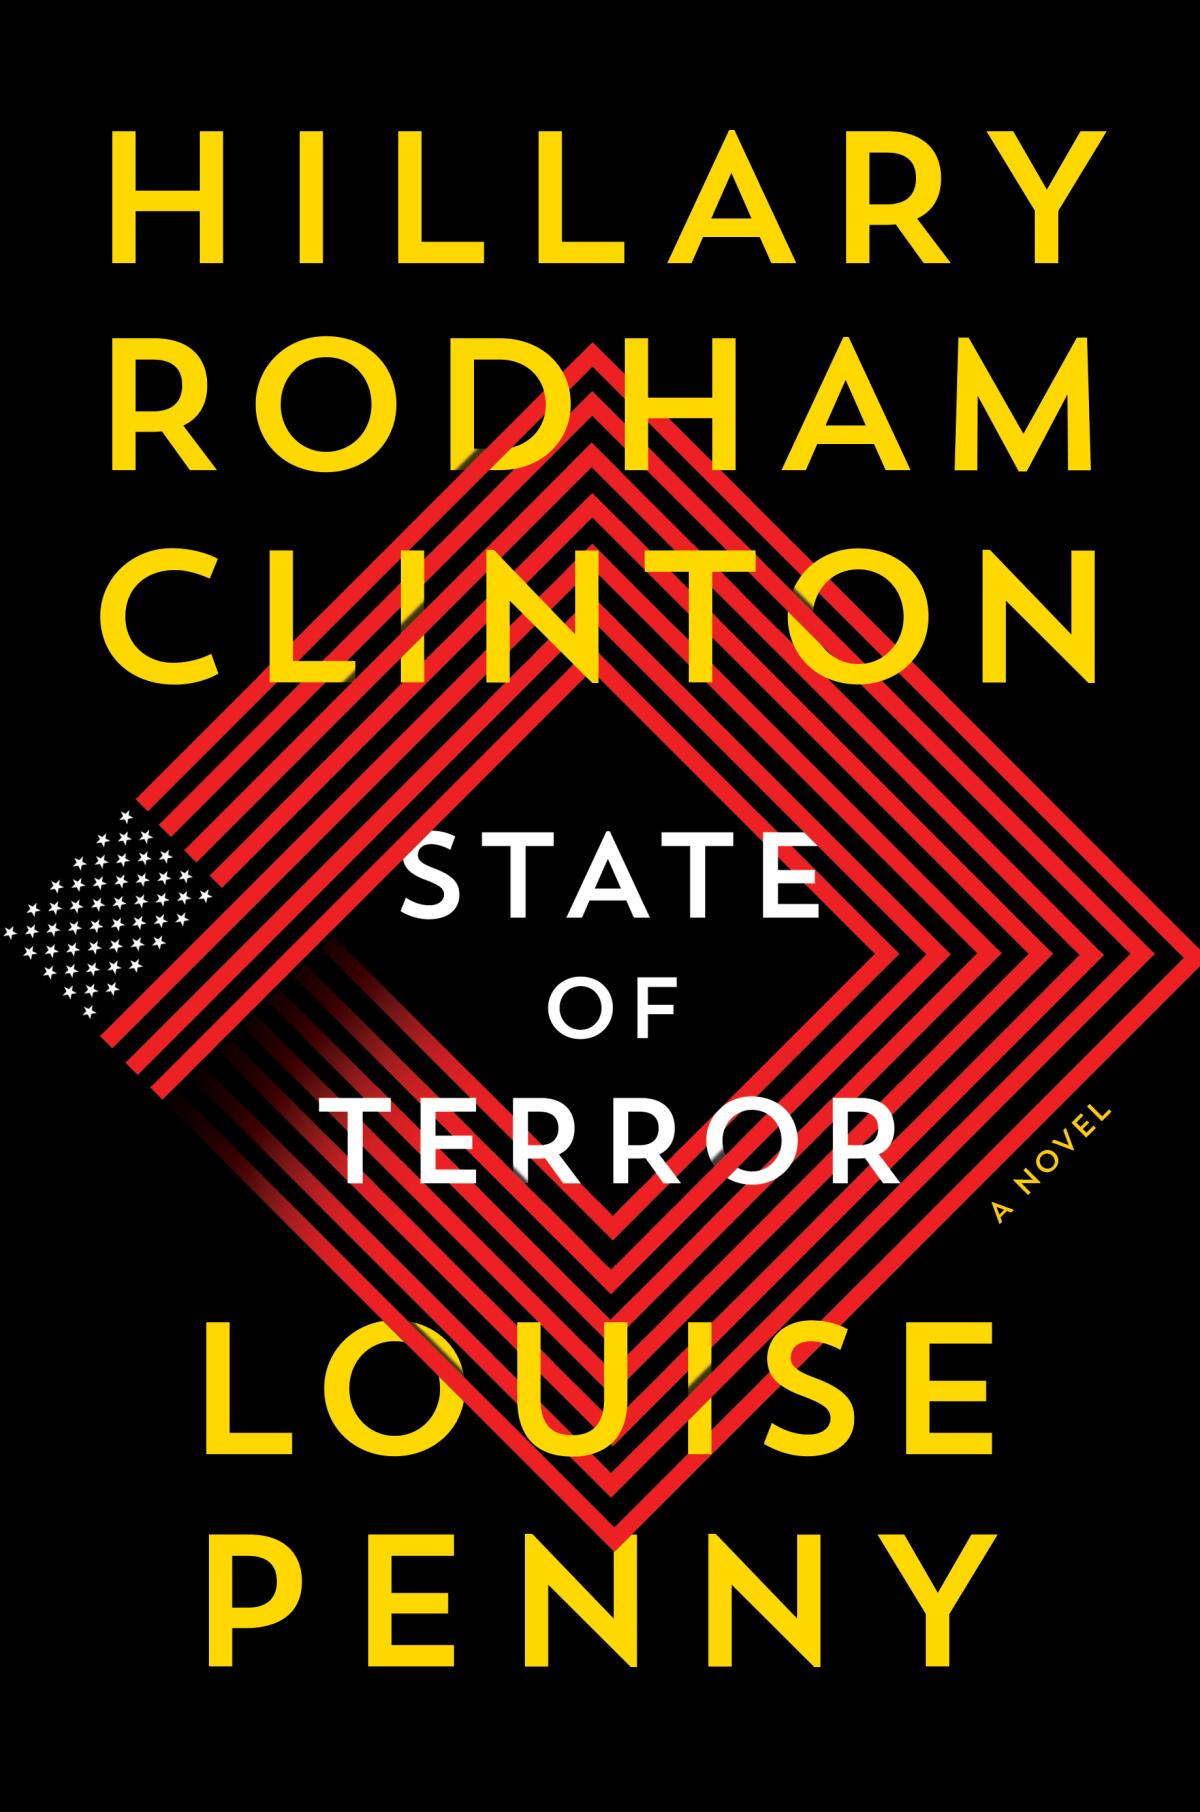 A book cover of "State of Terror," by Hillary Rodham Clinton and Louise Penny